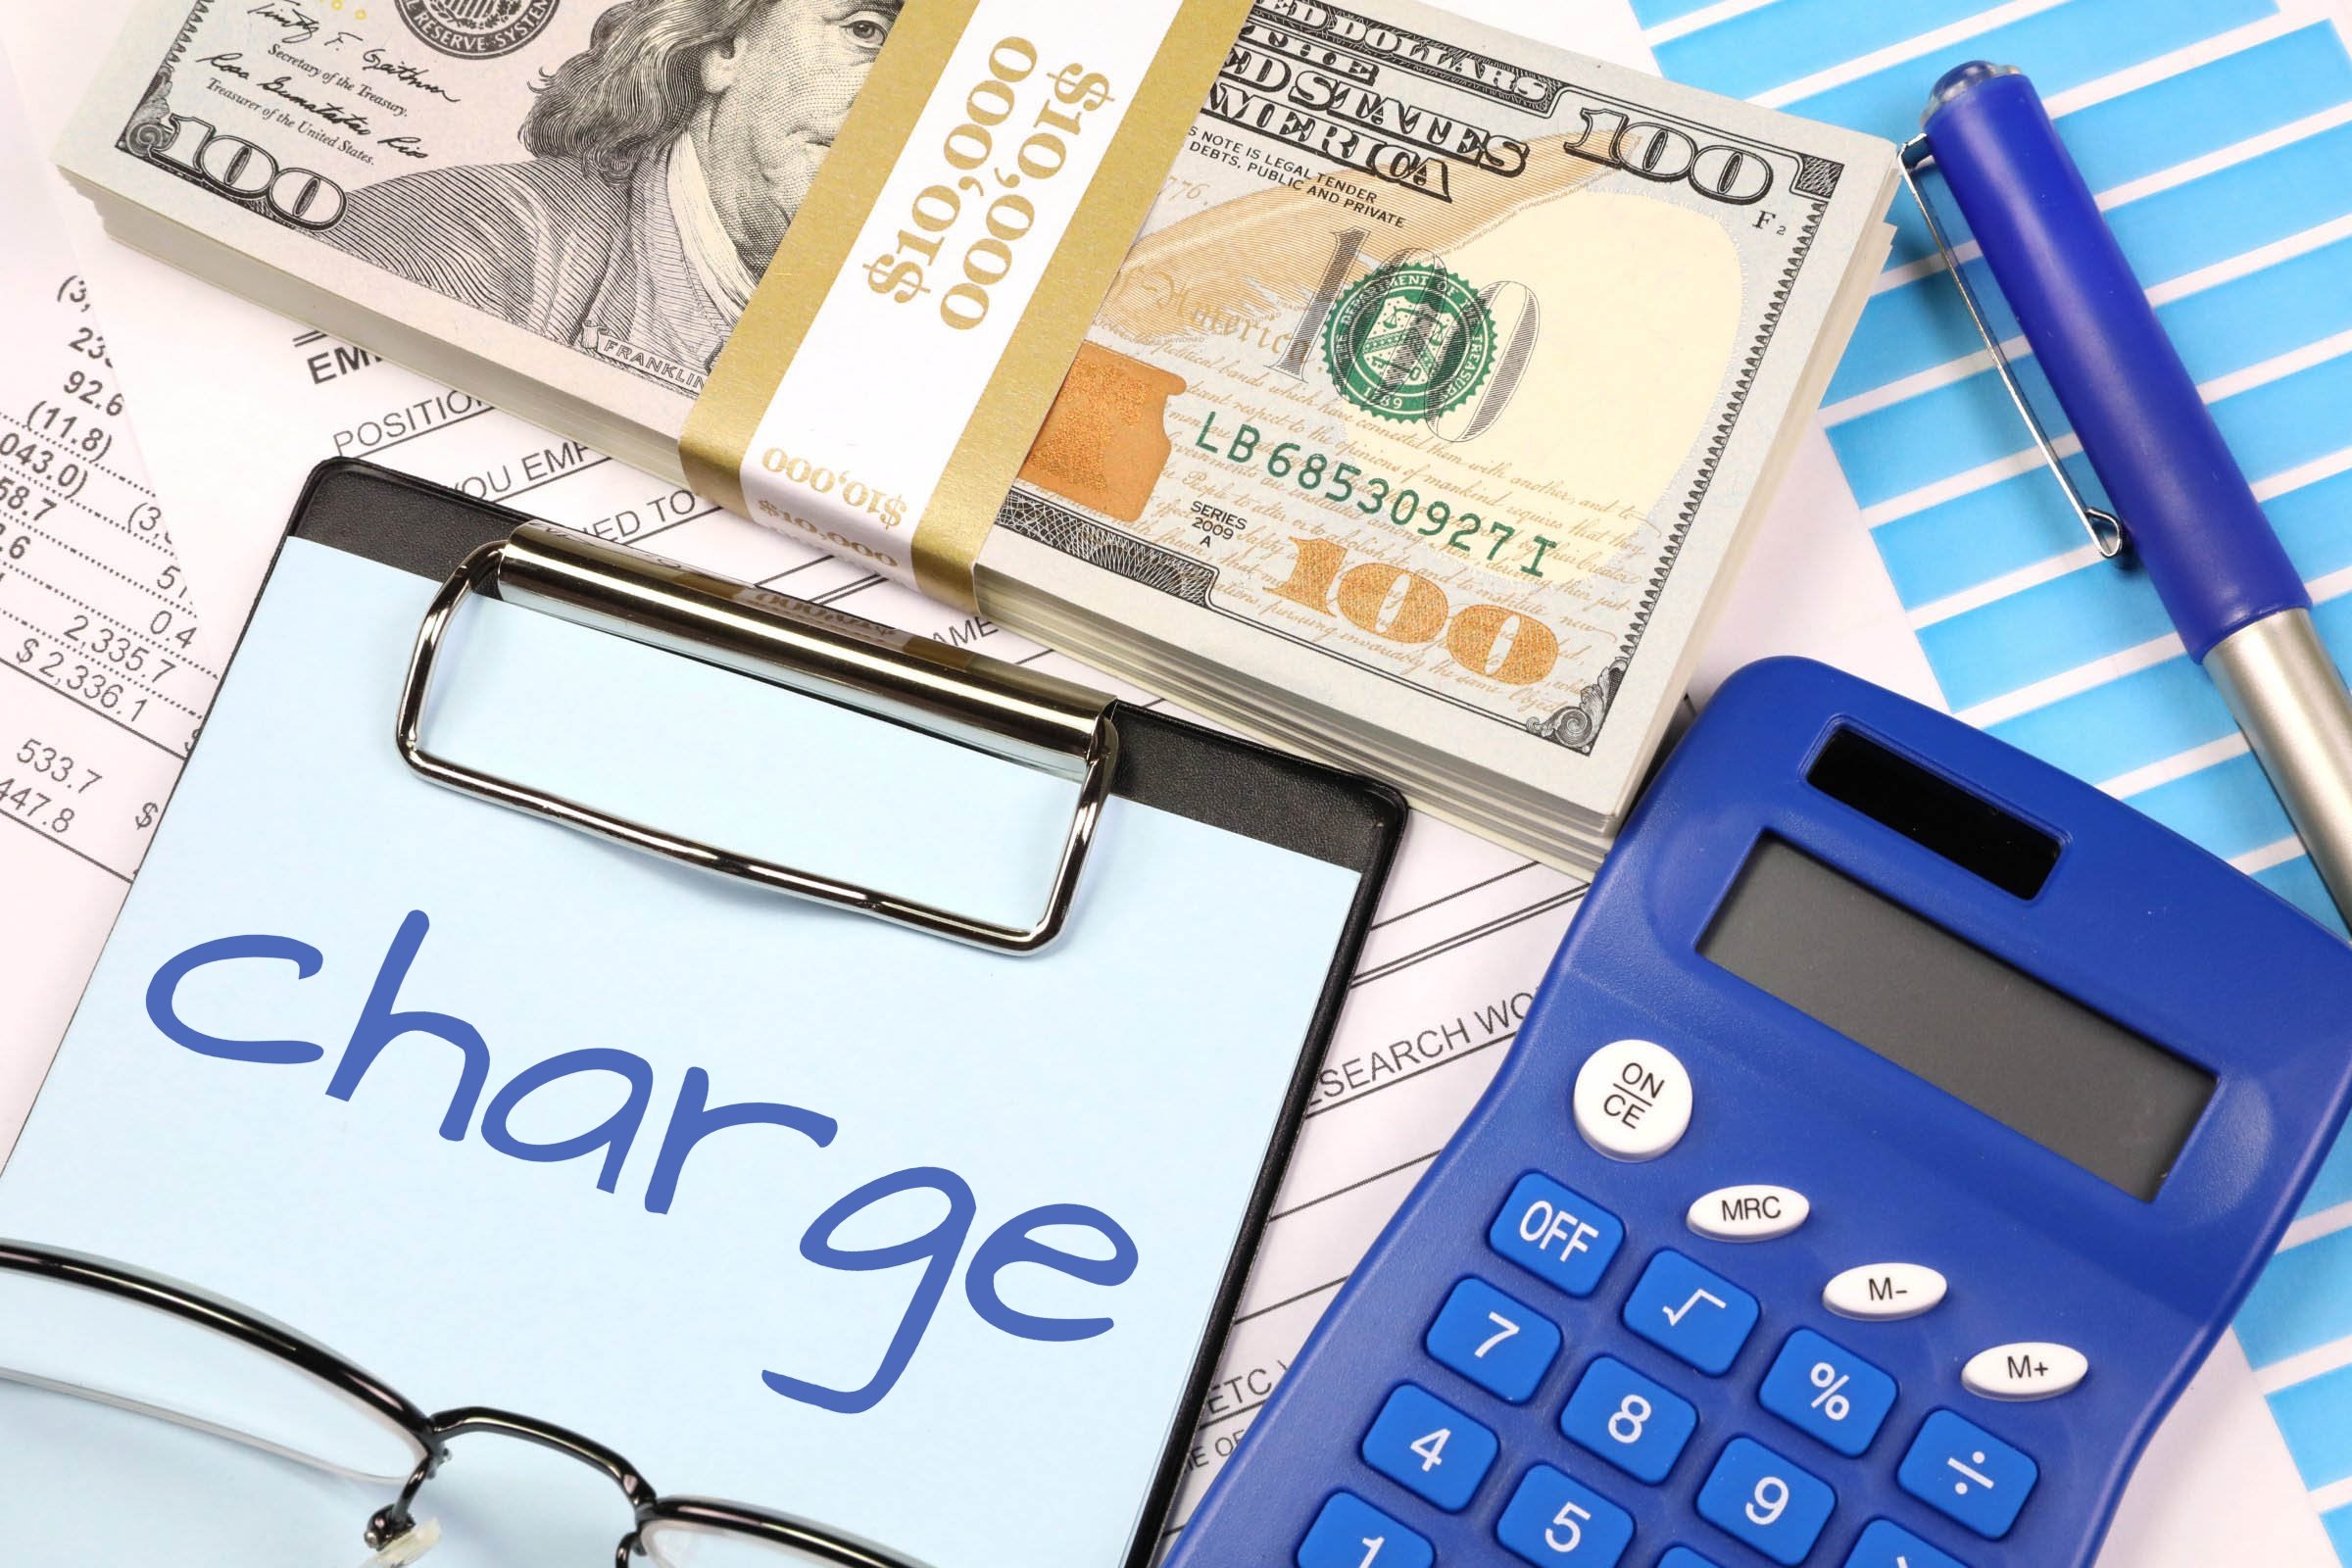 Free Of Charge Creative Commons Charge Image Financial 11